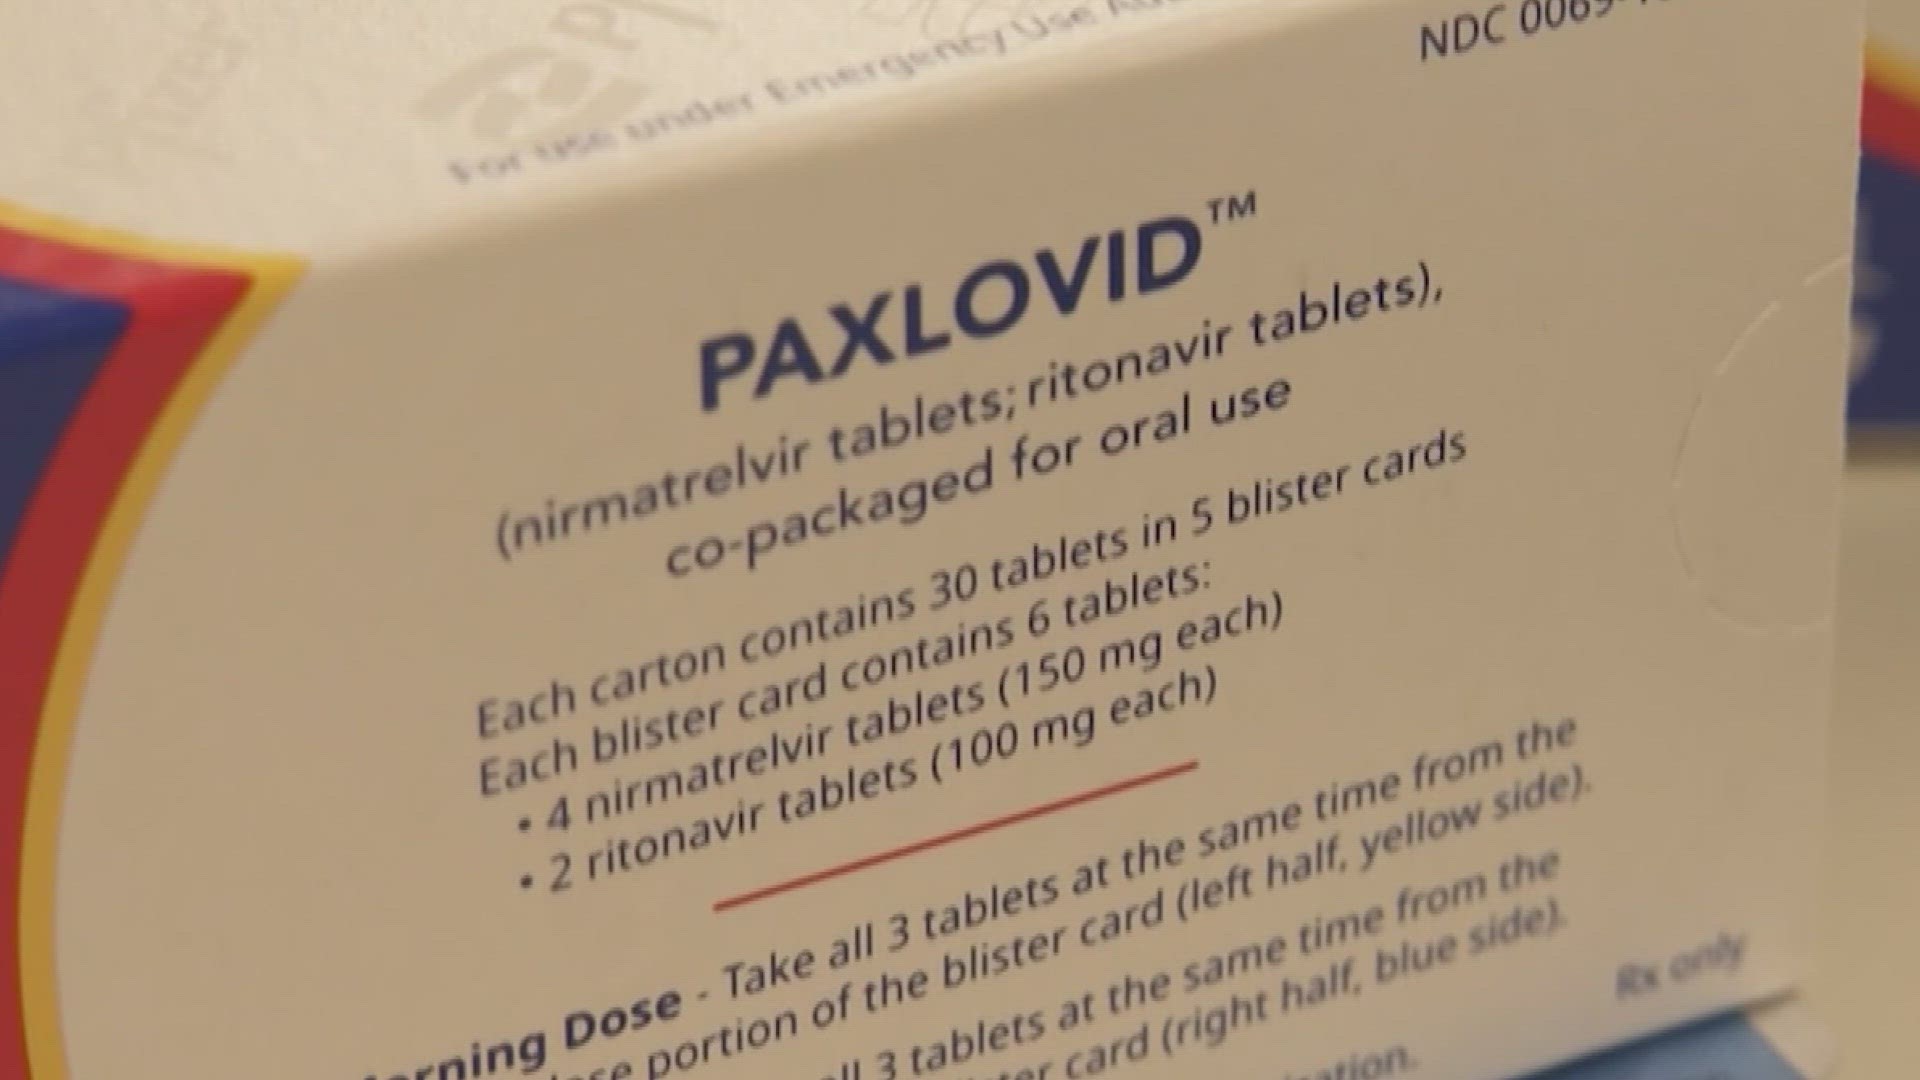 9NEWS Medical Expert Dr. Payal Kohli discusses what Paxlovid is and how it works to treat COVID-19.